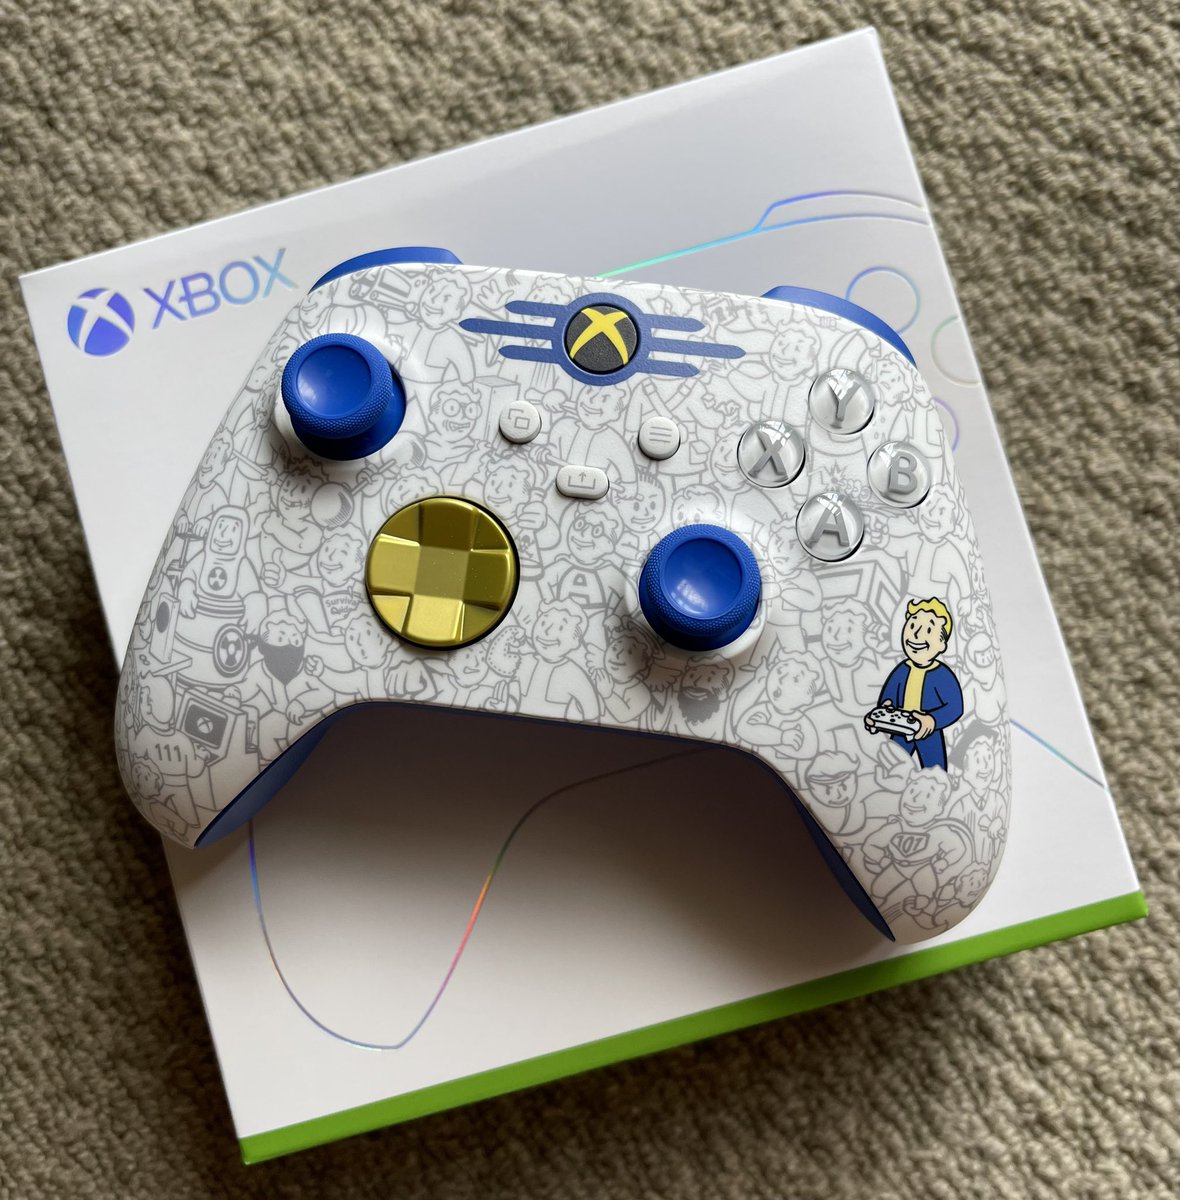 Might just be my favourite XBOX controller to date!

@XboxANZ @Bethesda_ANZ @Fallout 

#xbox #XboxGamePass #XboxSeries #XboxSeriesS #XboxSeriesX #controller #collector #Gamerlife #gamedev #LimitedEdition #Gamers #gaming #collectors #videogames #GamersUnite #Fallout #Bethesda